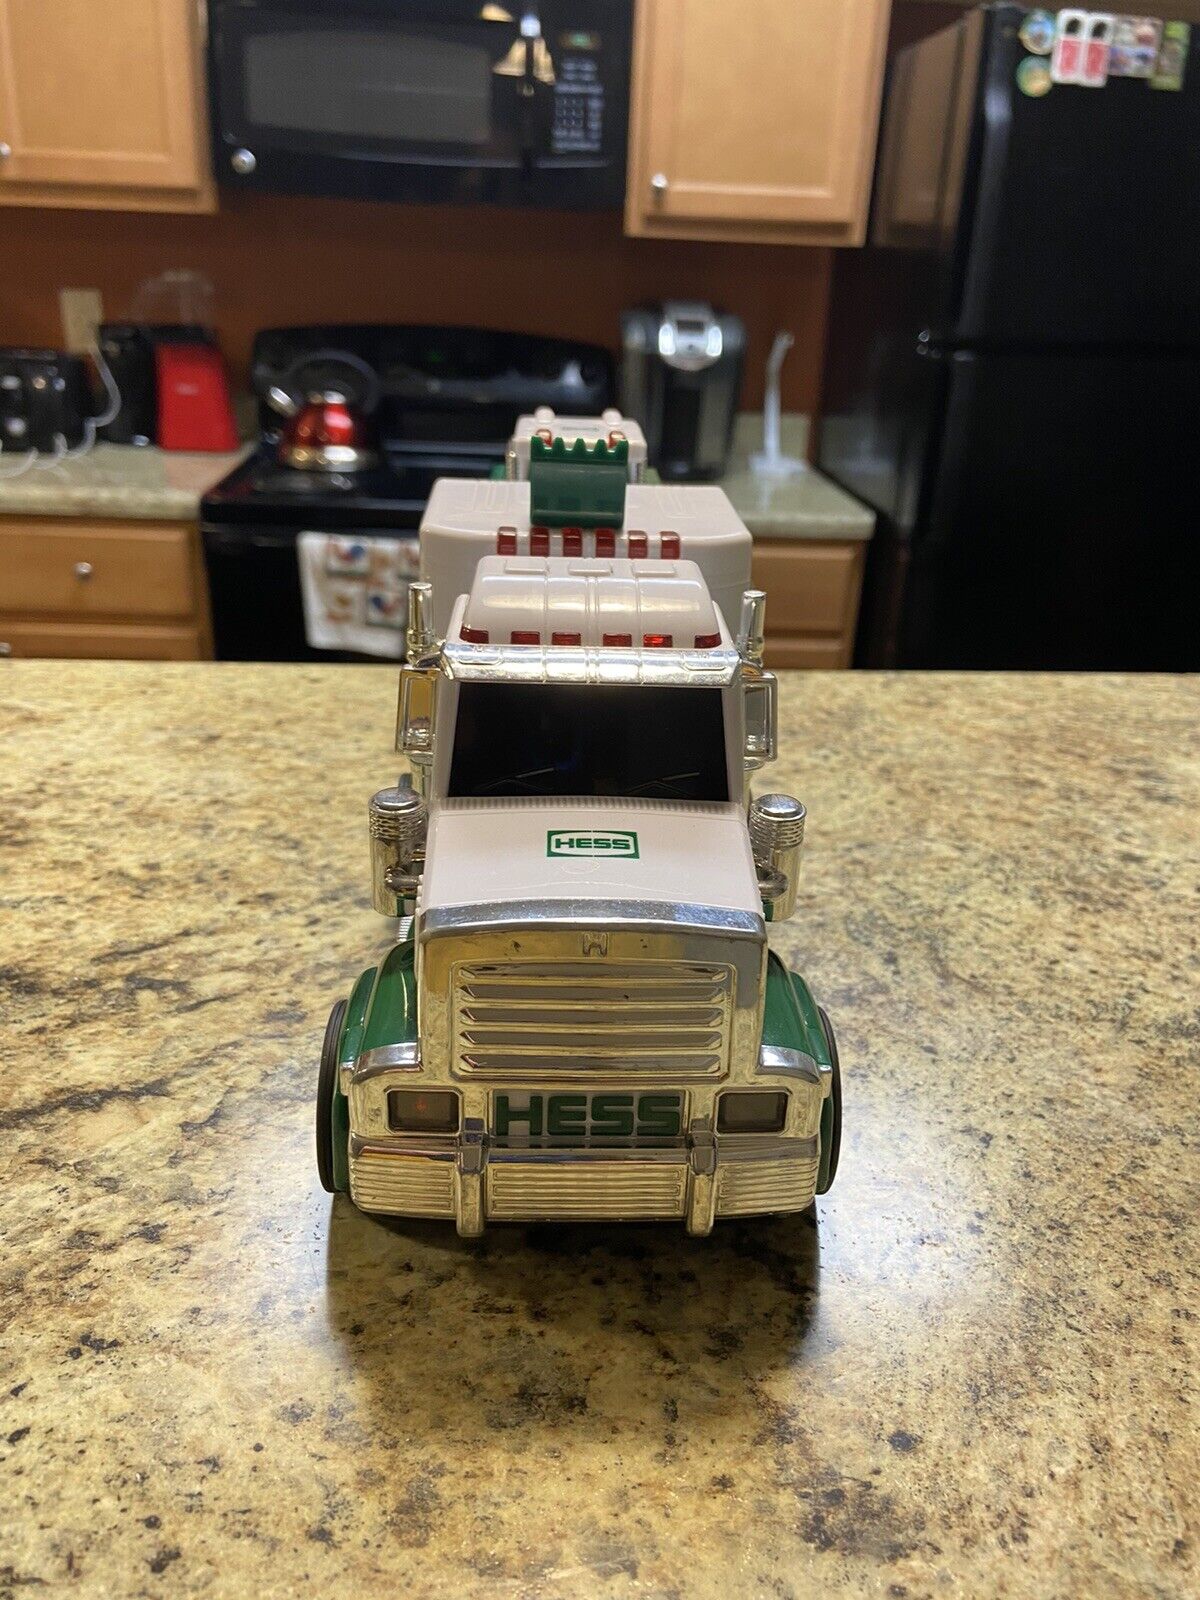 2013 Hess Dump Truck and Loader.  Excellent condition.  No Box.